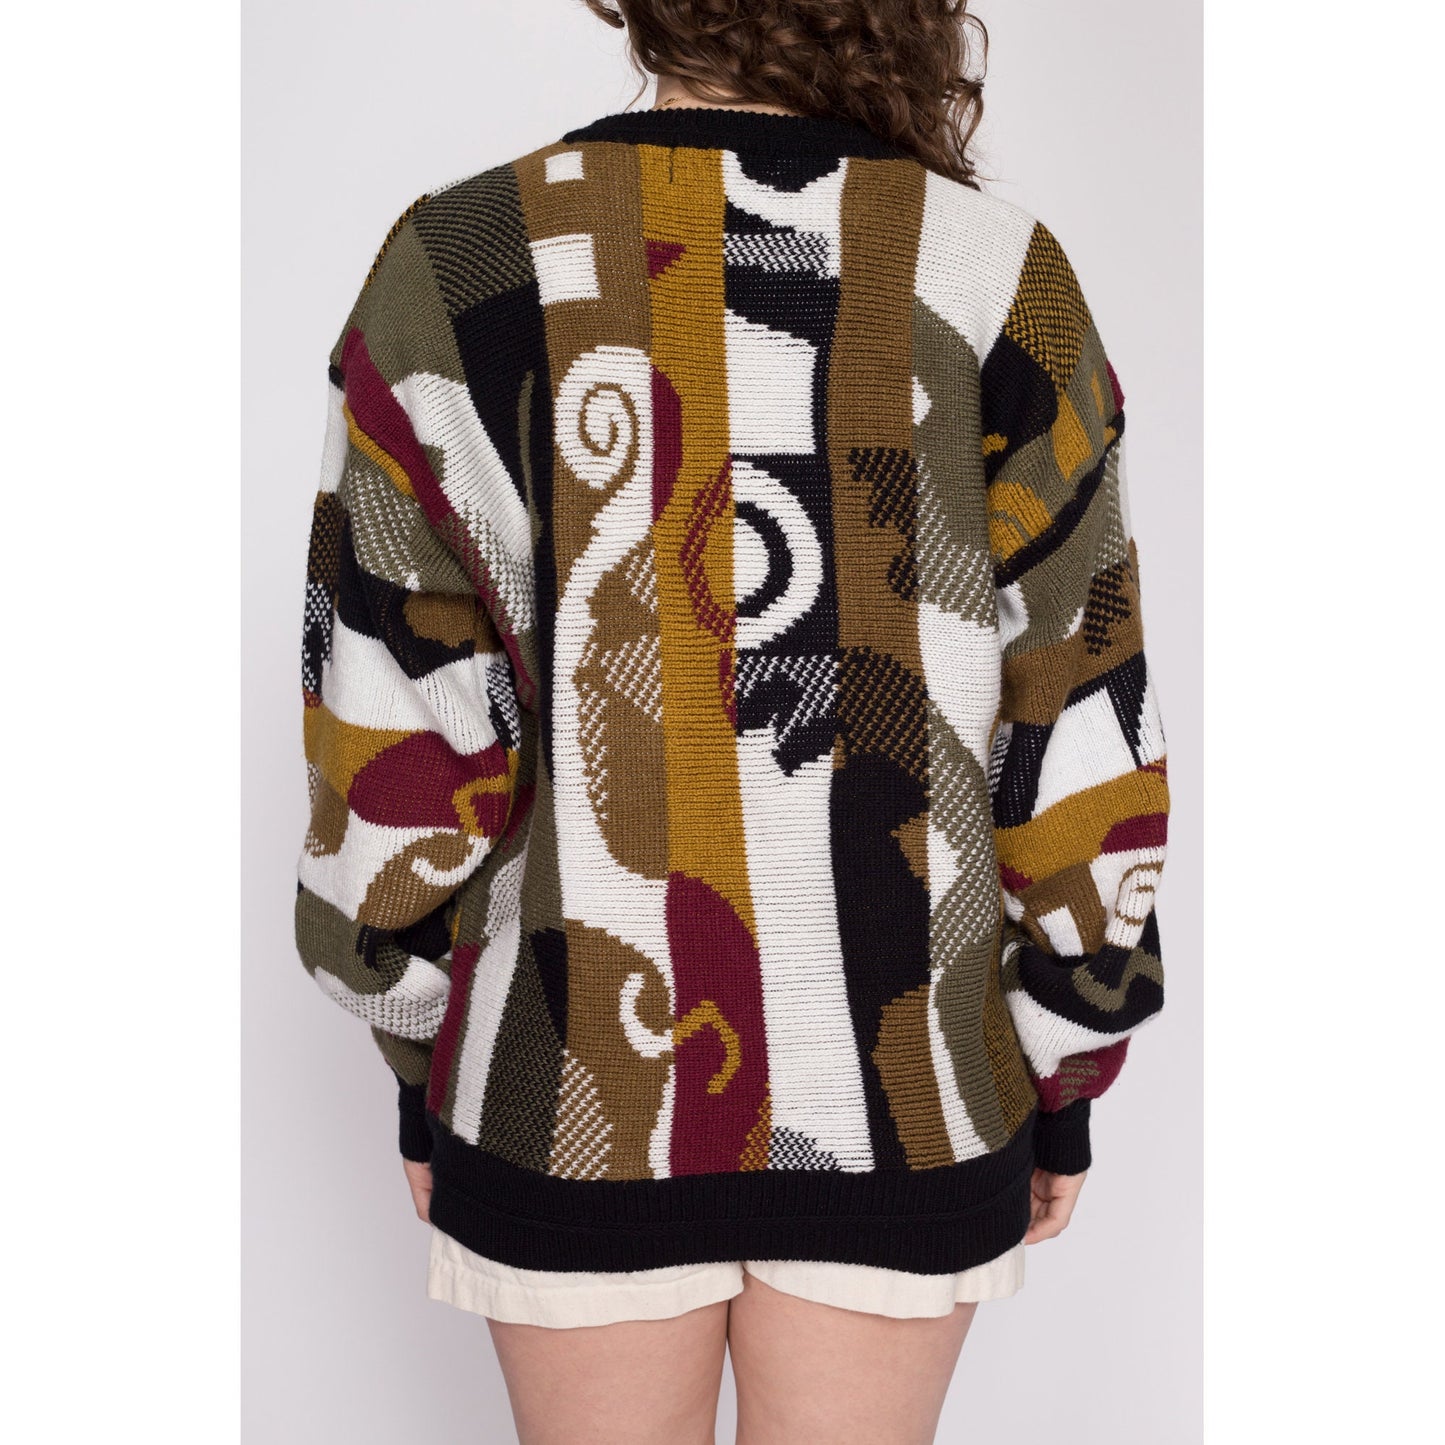 Lrg-XL 90s Abstract Slouchy Knit Sweater Unisex | Vintage Black Brown Striped Grunge Pullover